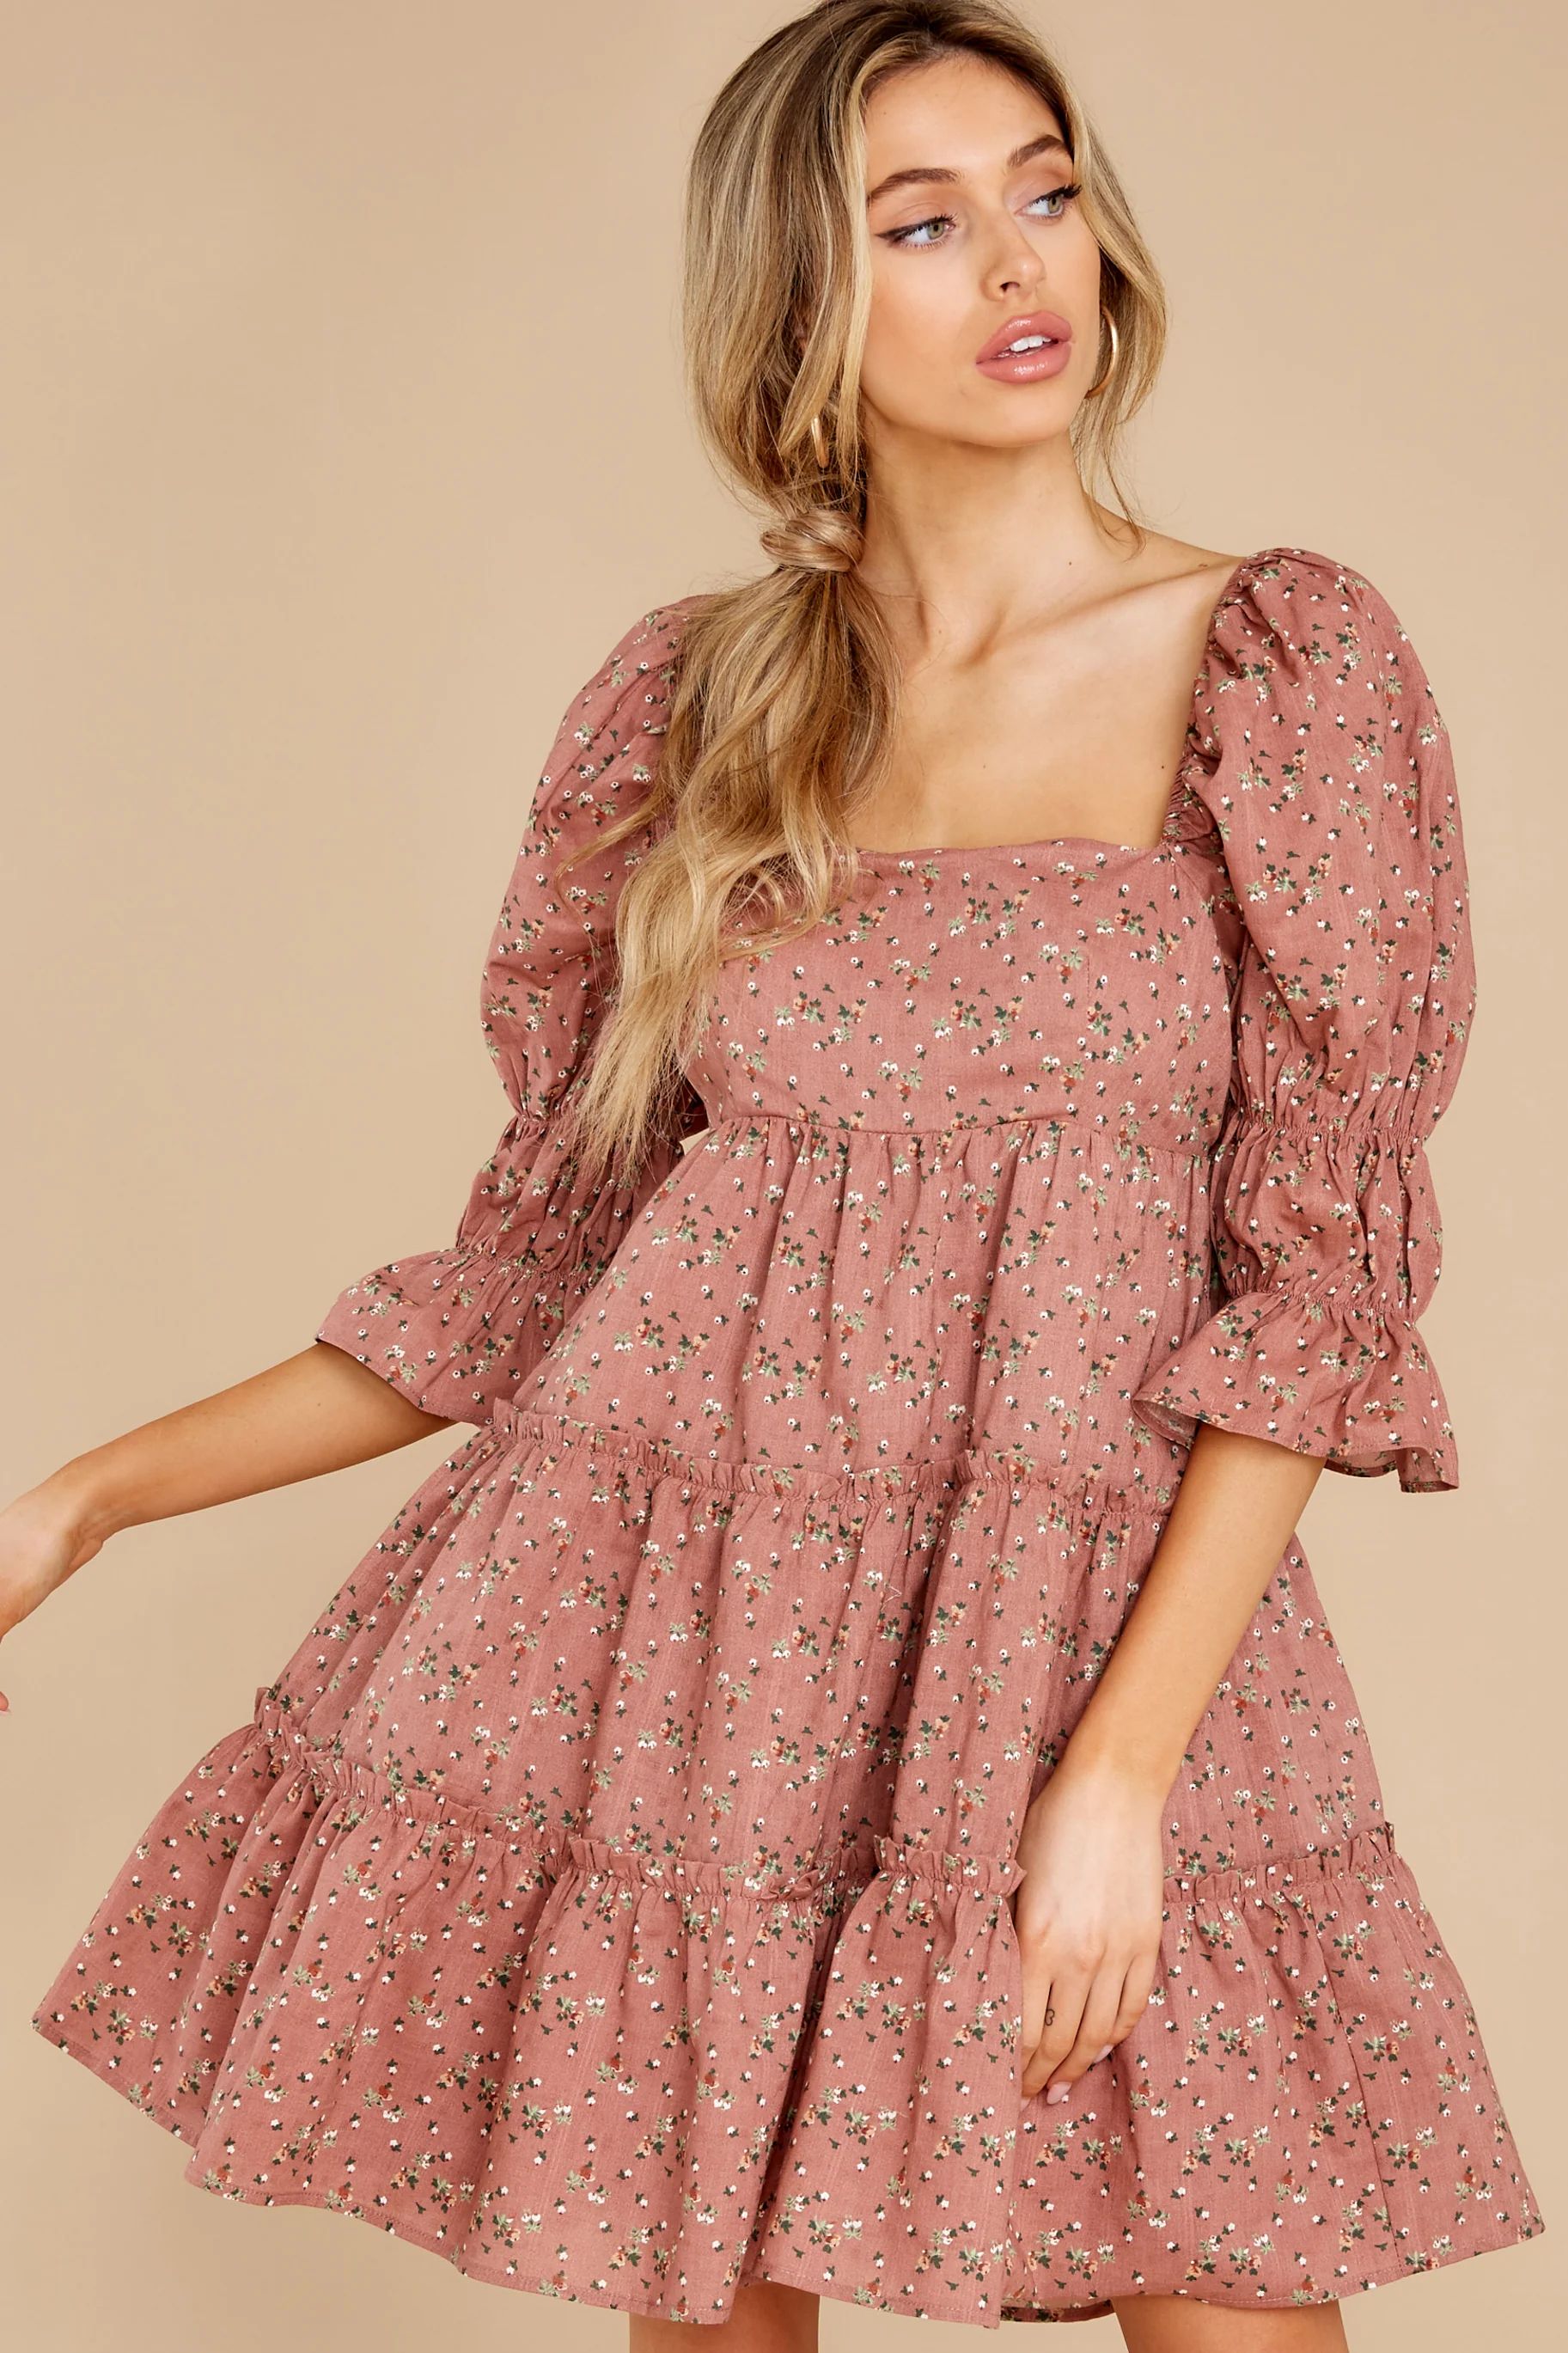 Genuine Smiles Dusty Rose Floral Print Dress | Red Dress 